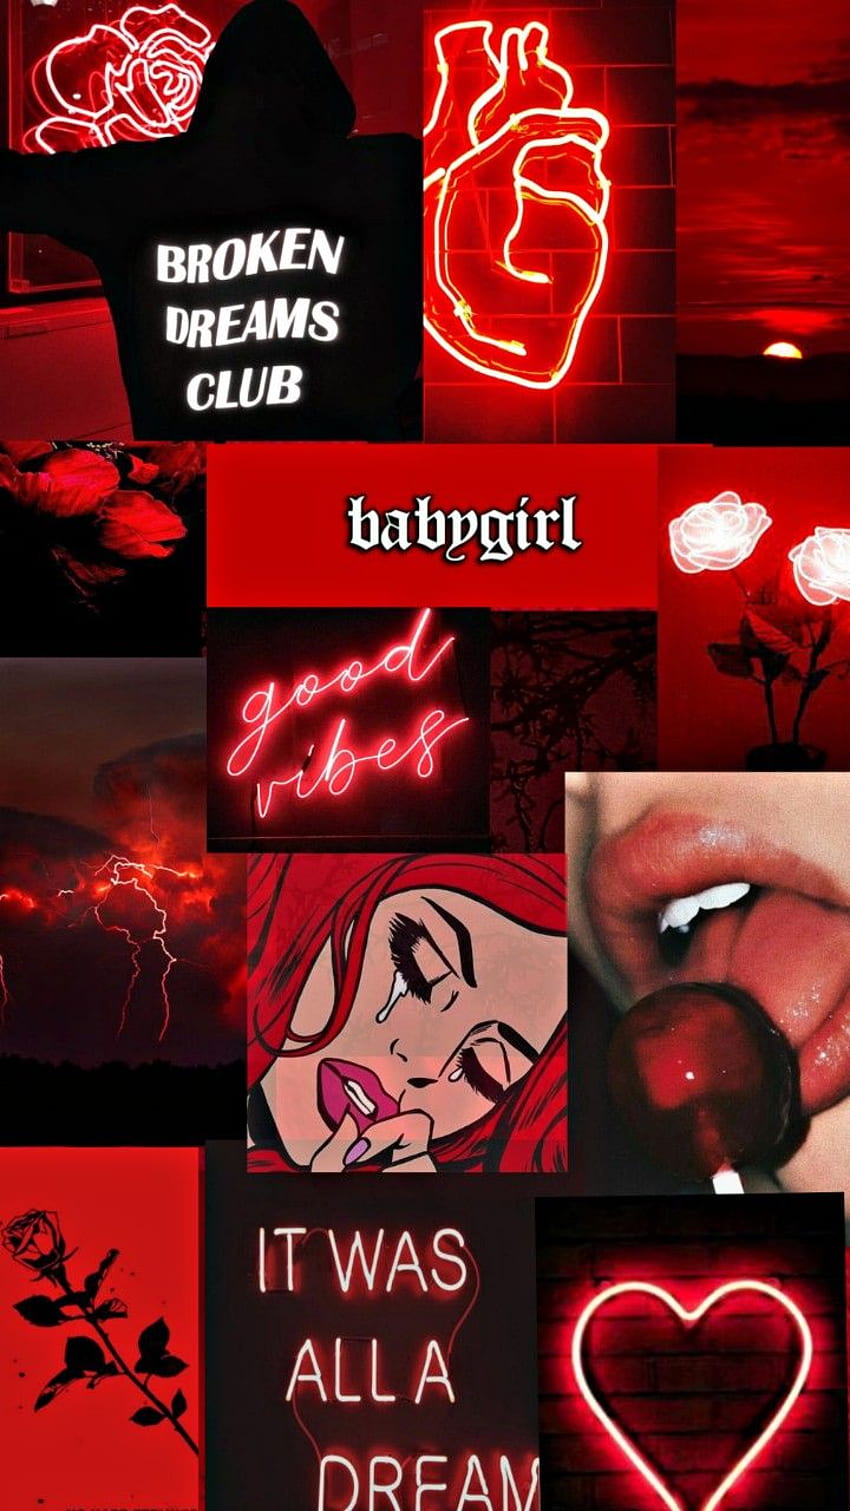 A collage of pictures with red and black - Red, dark red